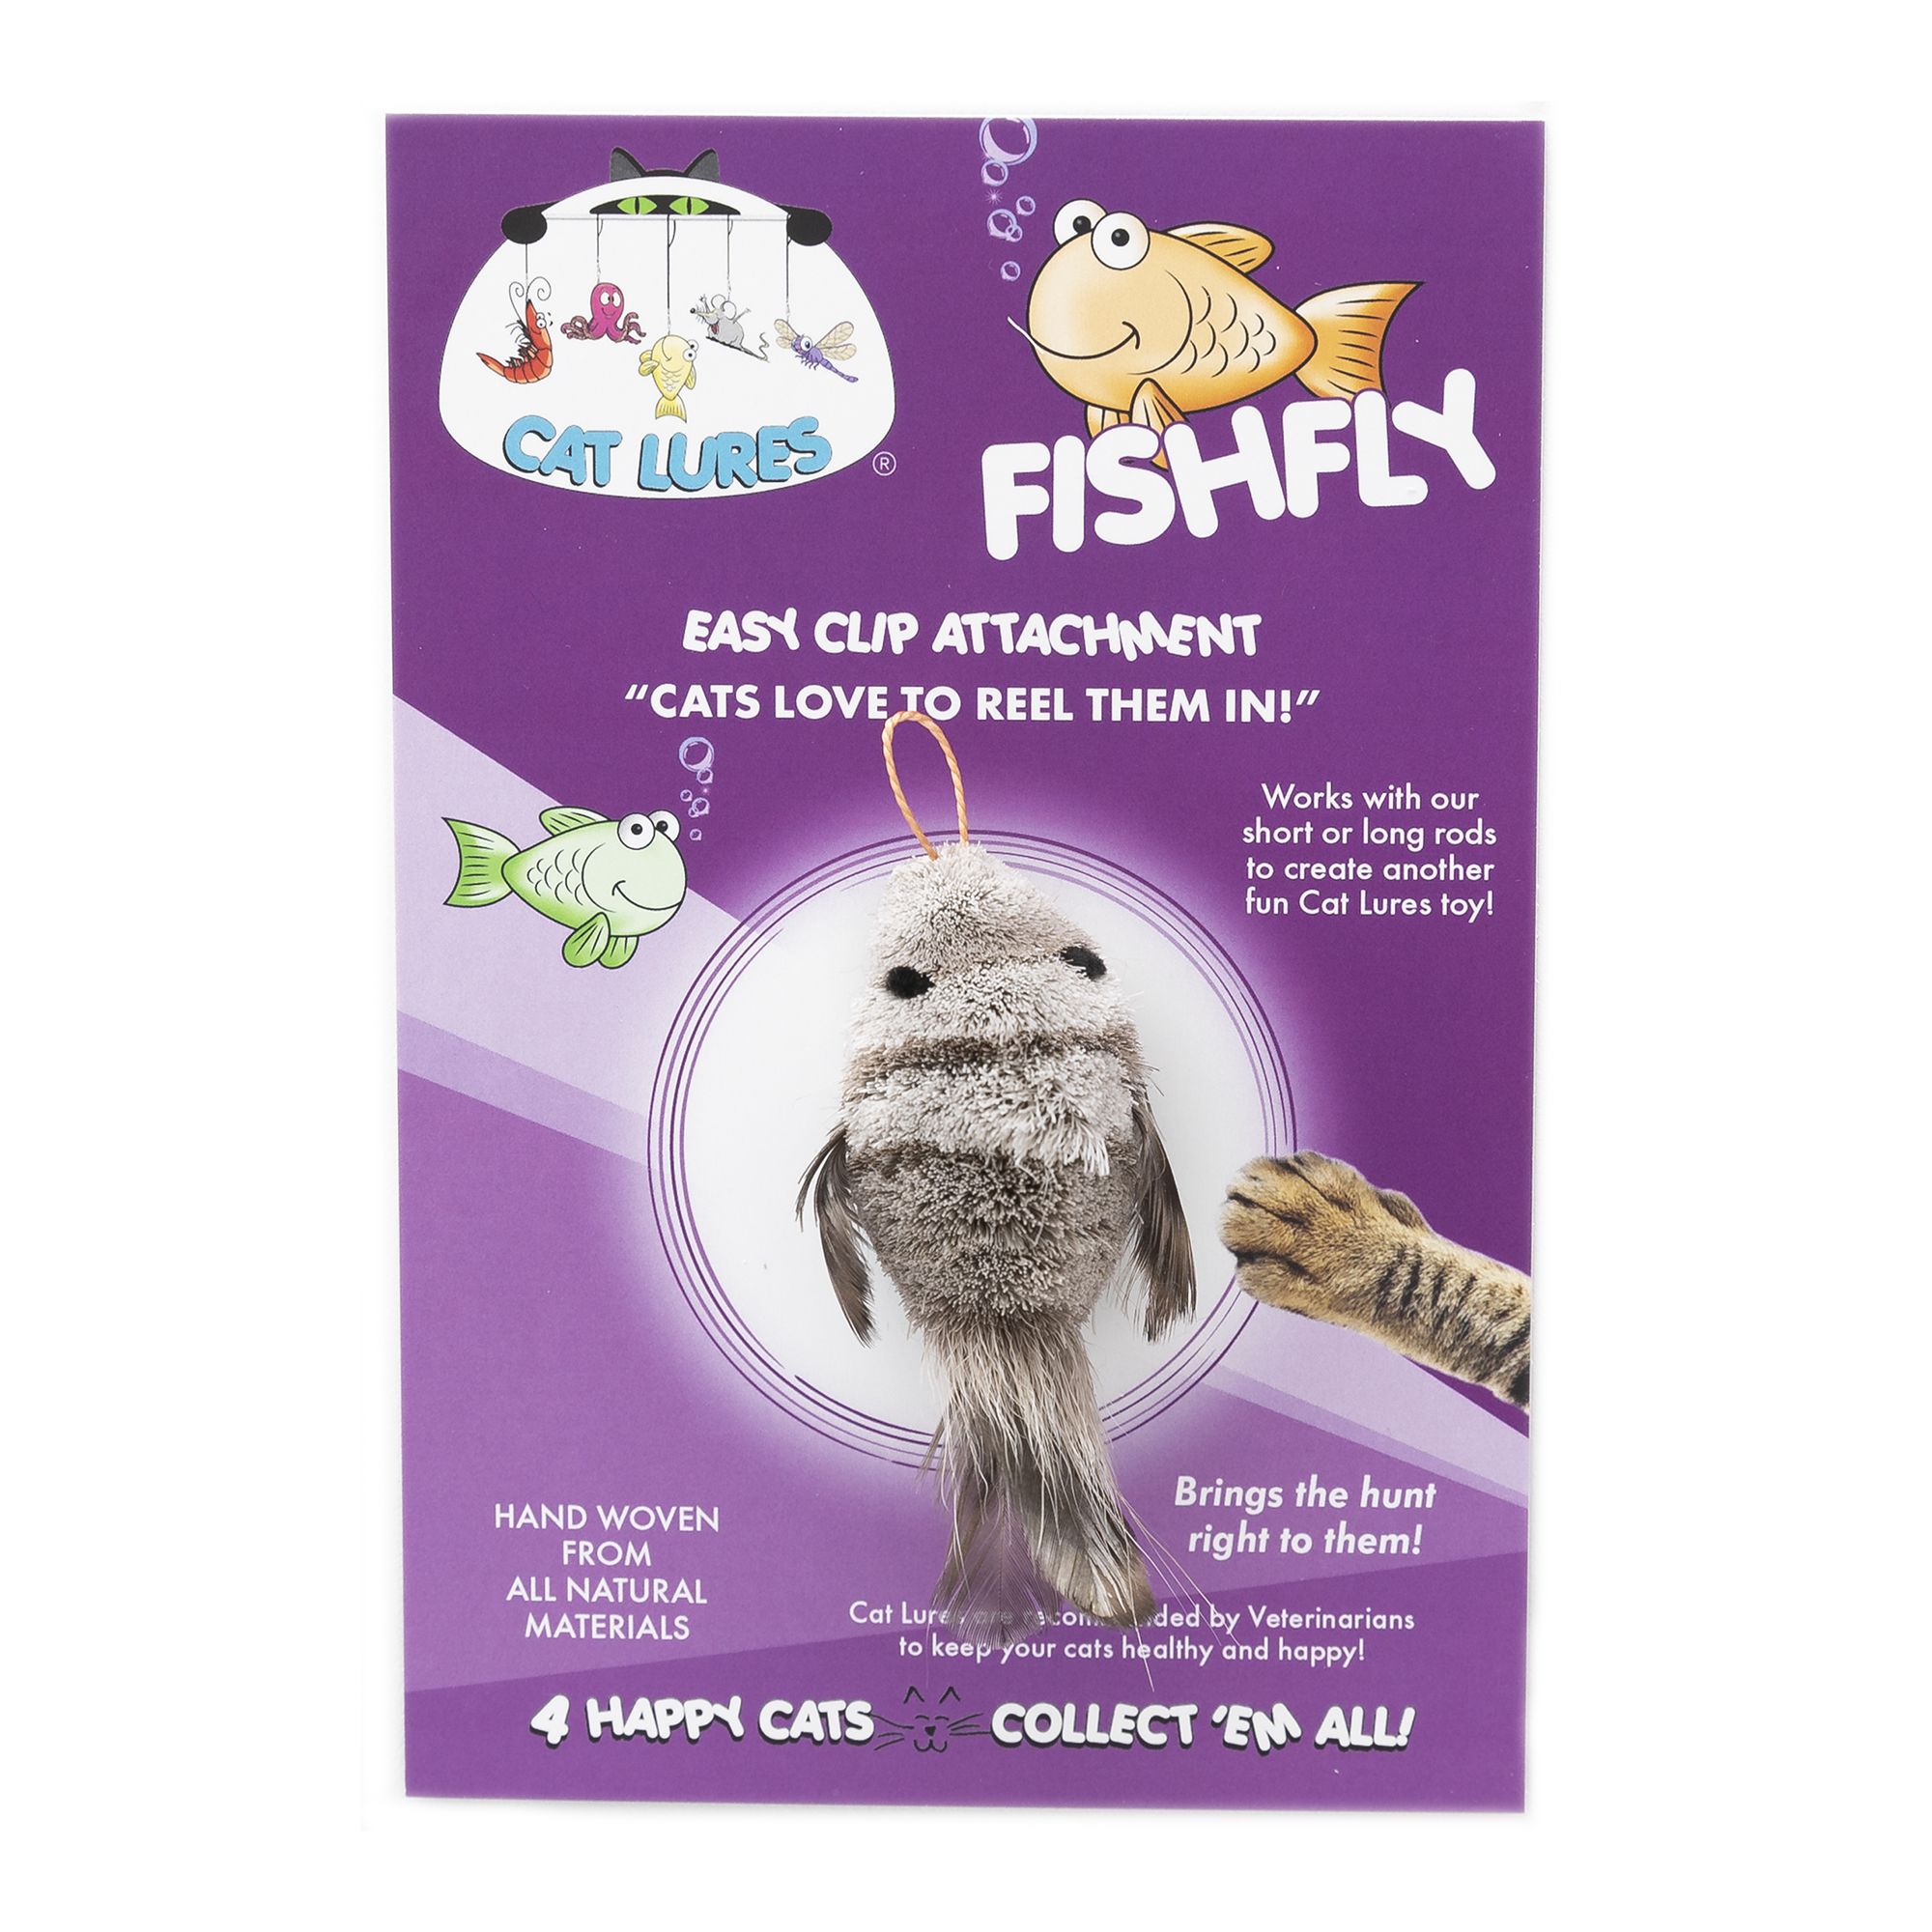 Cat Lures Fishfly Attachment Cat Toy, cat Teasers & Wands